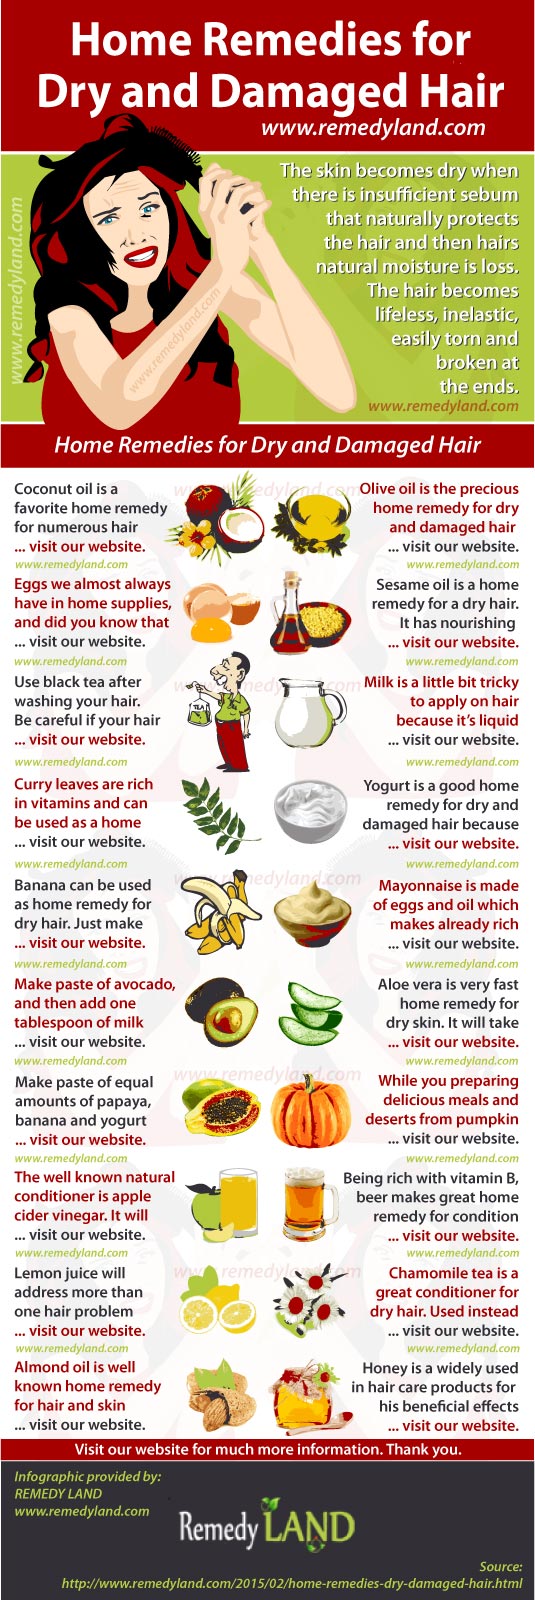 Home Remedies for Dry and Damaged Hair - Remedy Land